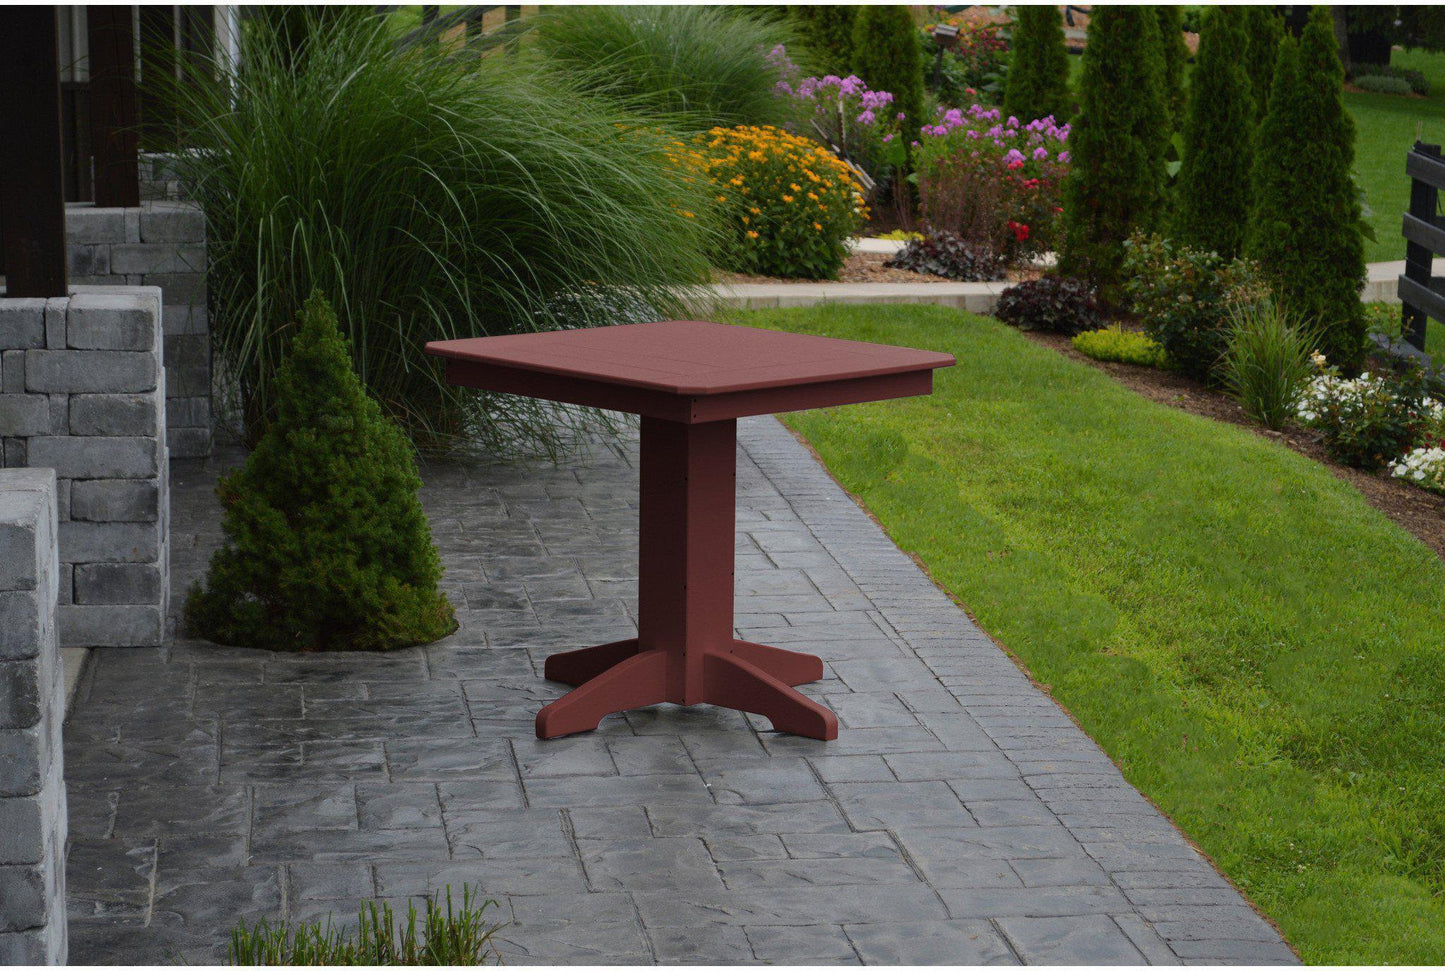 A&L Furniture Recycled Plastic 33" Square Dining Table - Cherrywood